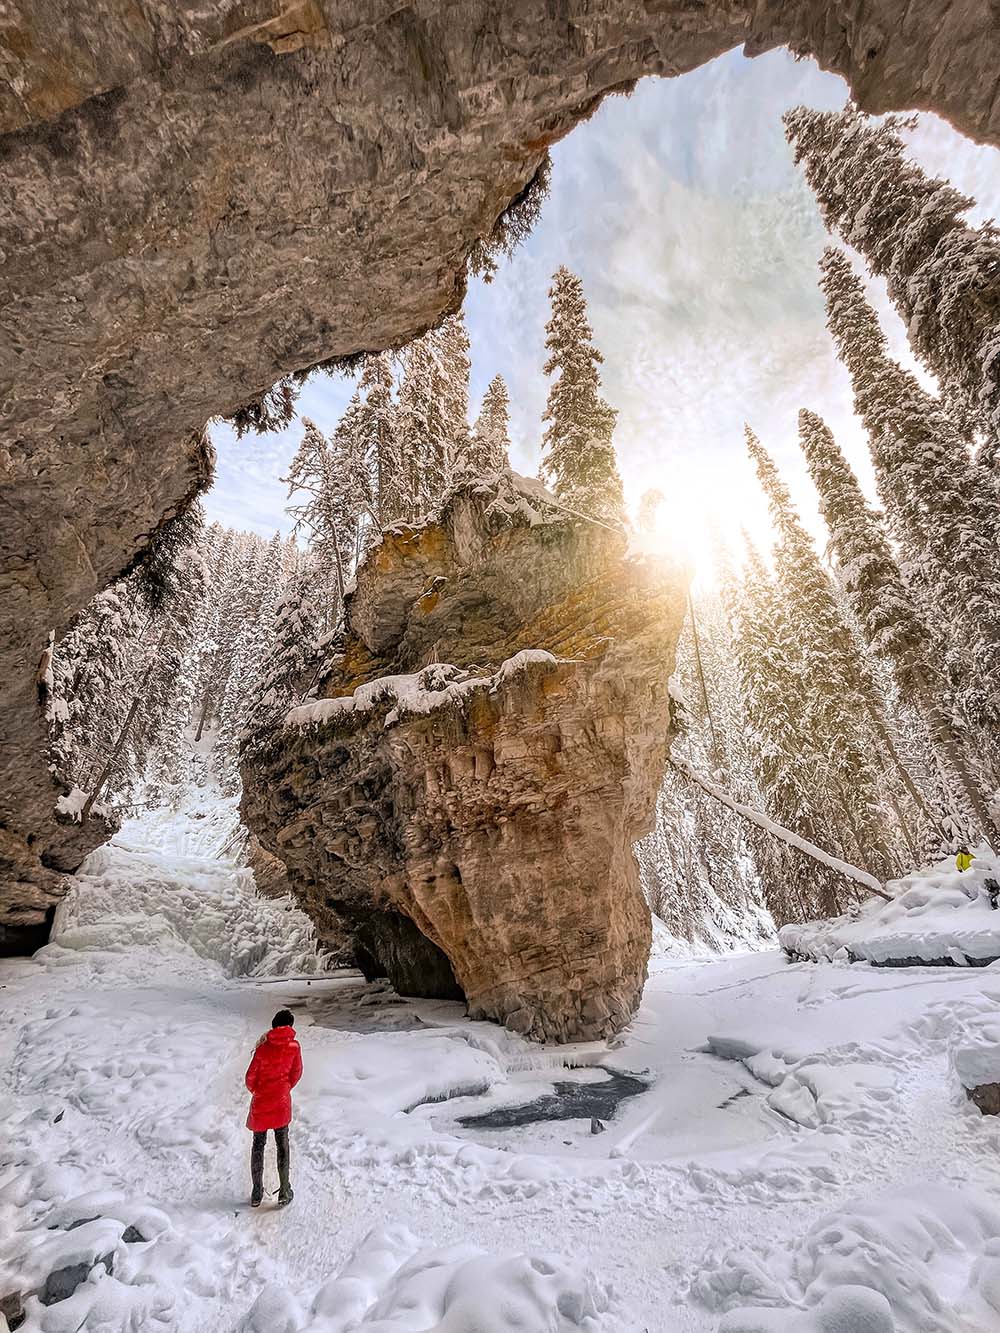 Experiencing the wonders of the Johnston Canyon ice walk is something you absolutely have to do when visiting Banff during the winter months. This guide has everything you need to know before hiking Johnston Canyon in winter. It includes tips on everything from how to prepare, what to wear, special equipment you'll need, how to find the secret cave and more! Pictured here: the Secret Cave